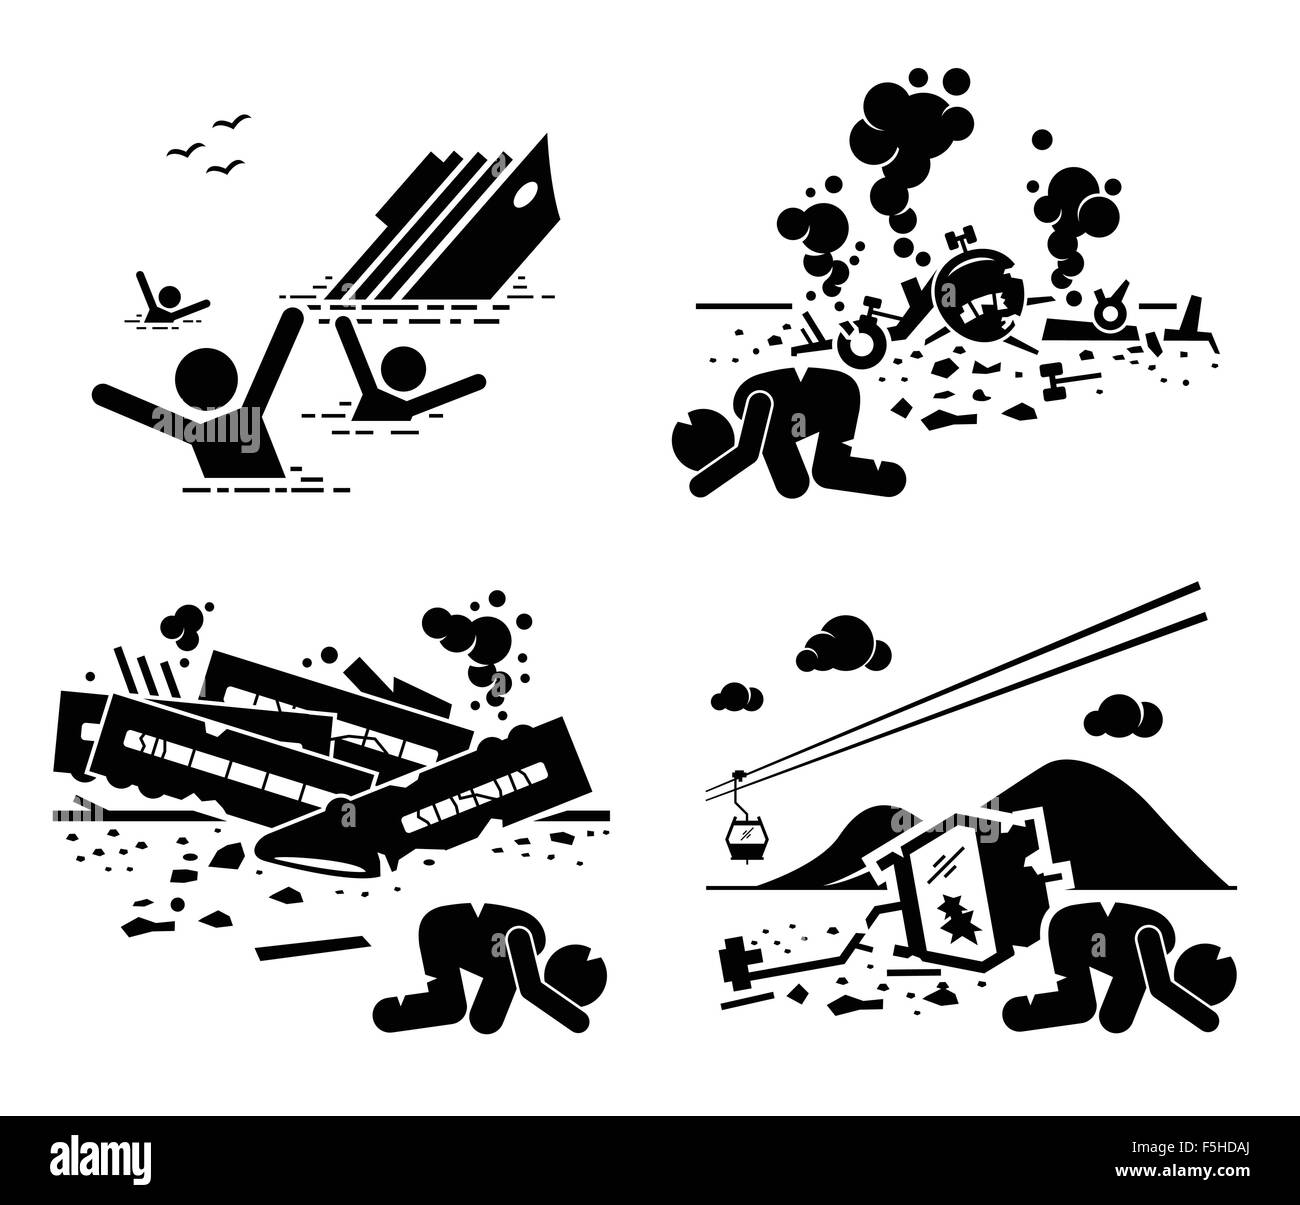 Disaster Accident Tragedy of Sinking Ship, Airplane Crash, Train Wreck, and Falling Cable Car Stick Figure Pictogram Icons Stock Vector